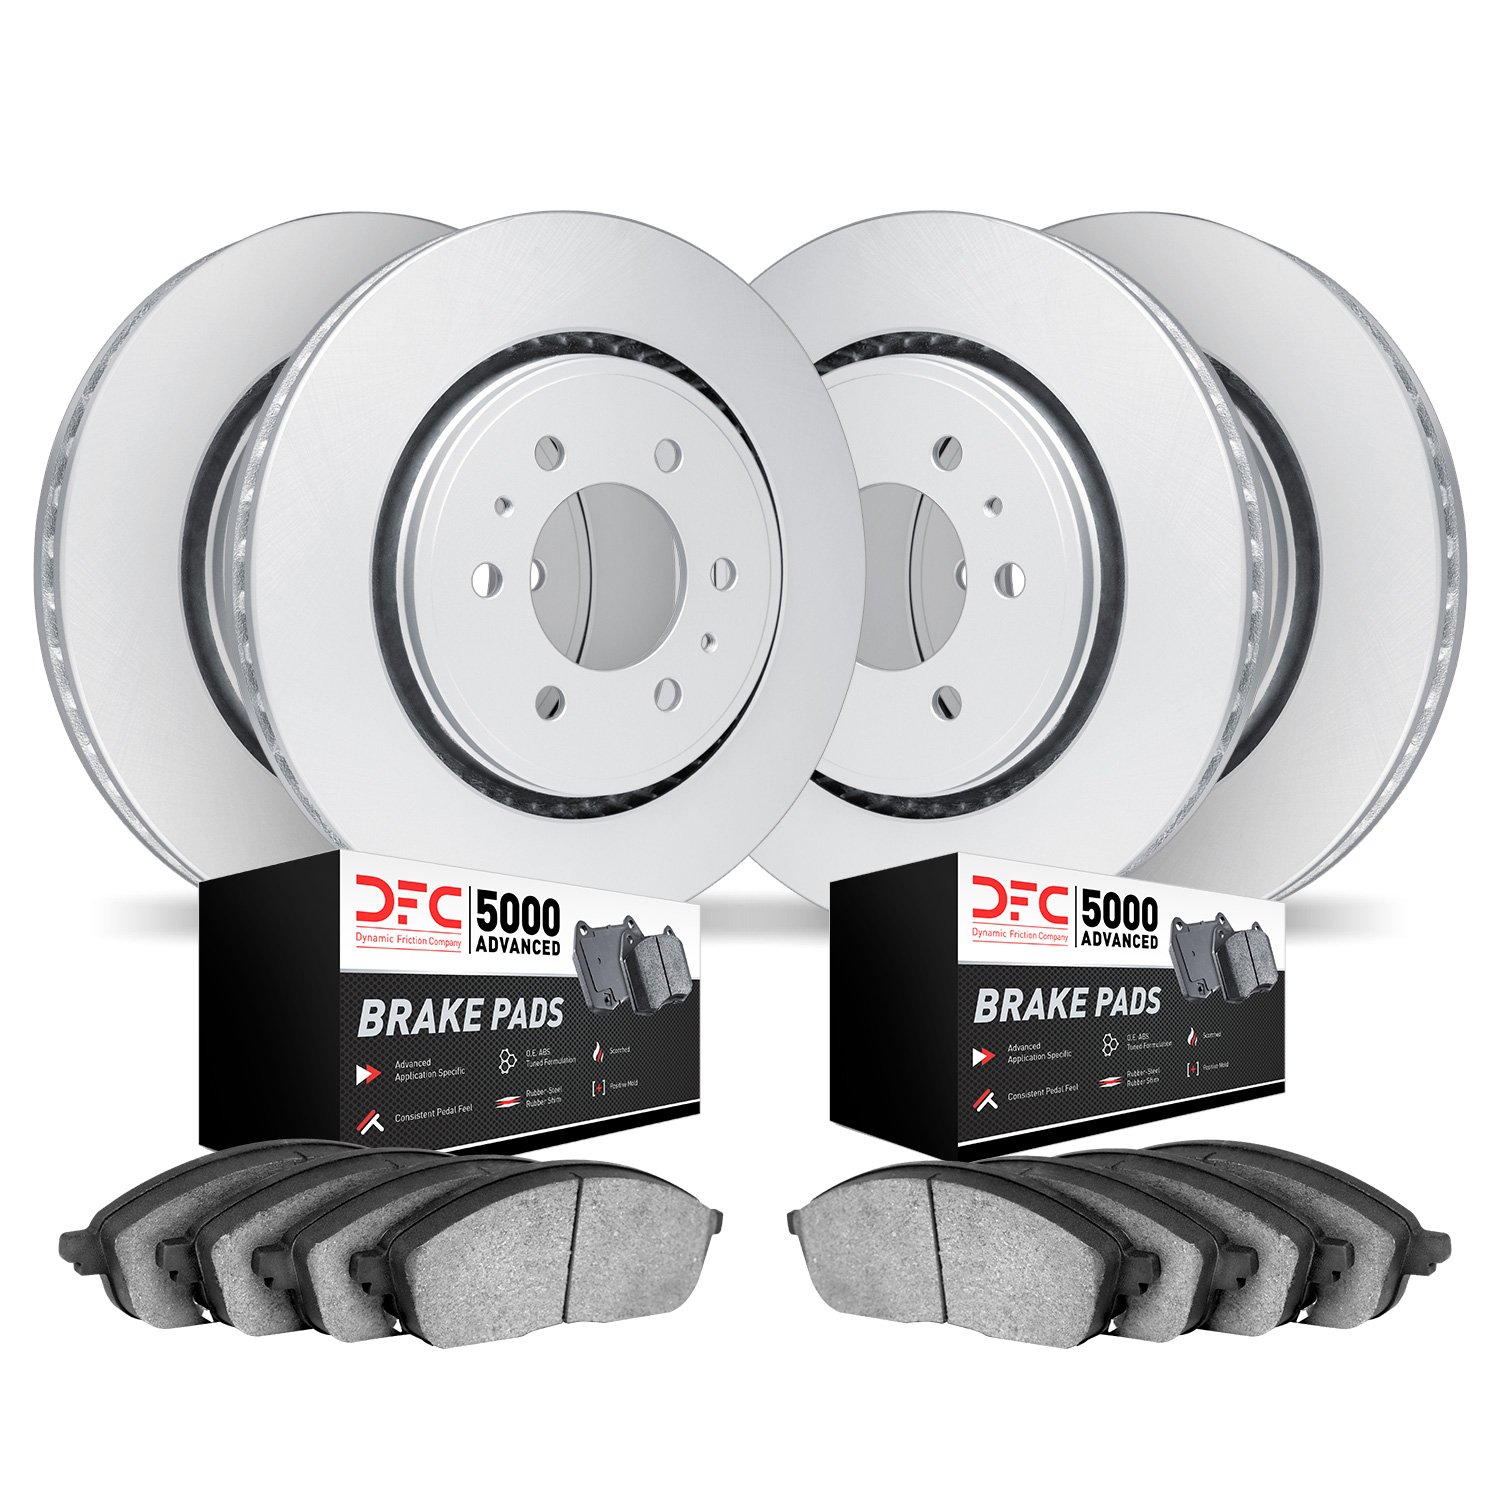 4504-48032 Geospec Brake Rotors w/5000 Advanced Brake Pads Kit, 2007-2014 GM, Position: Front and Rear